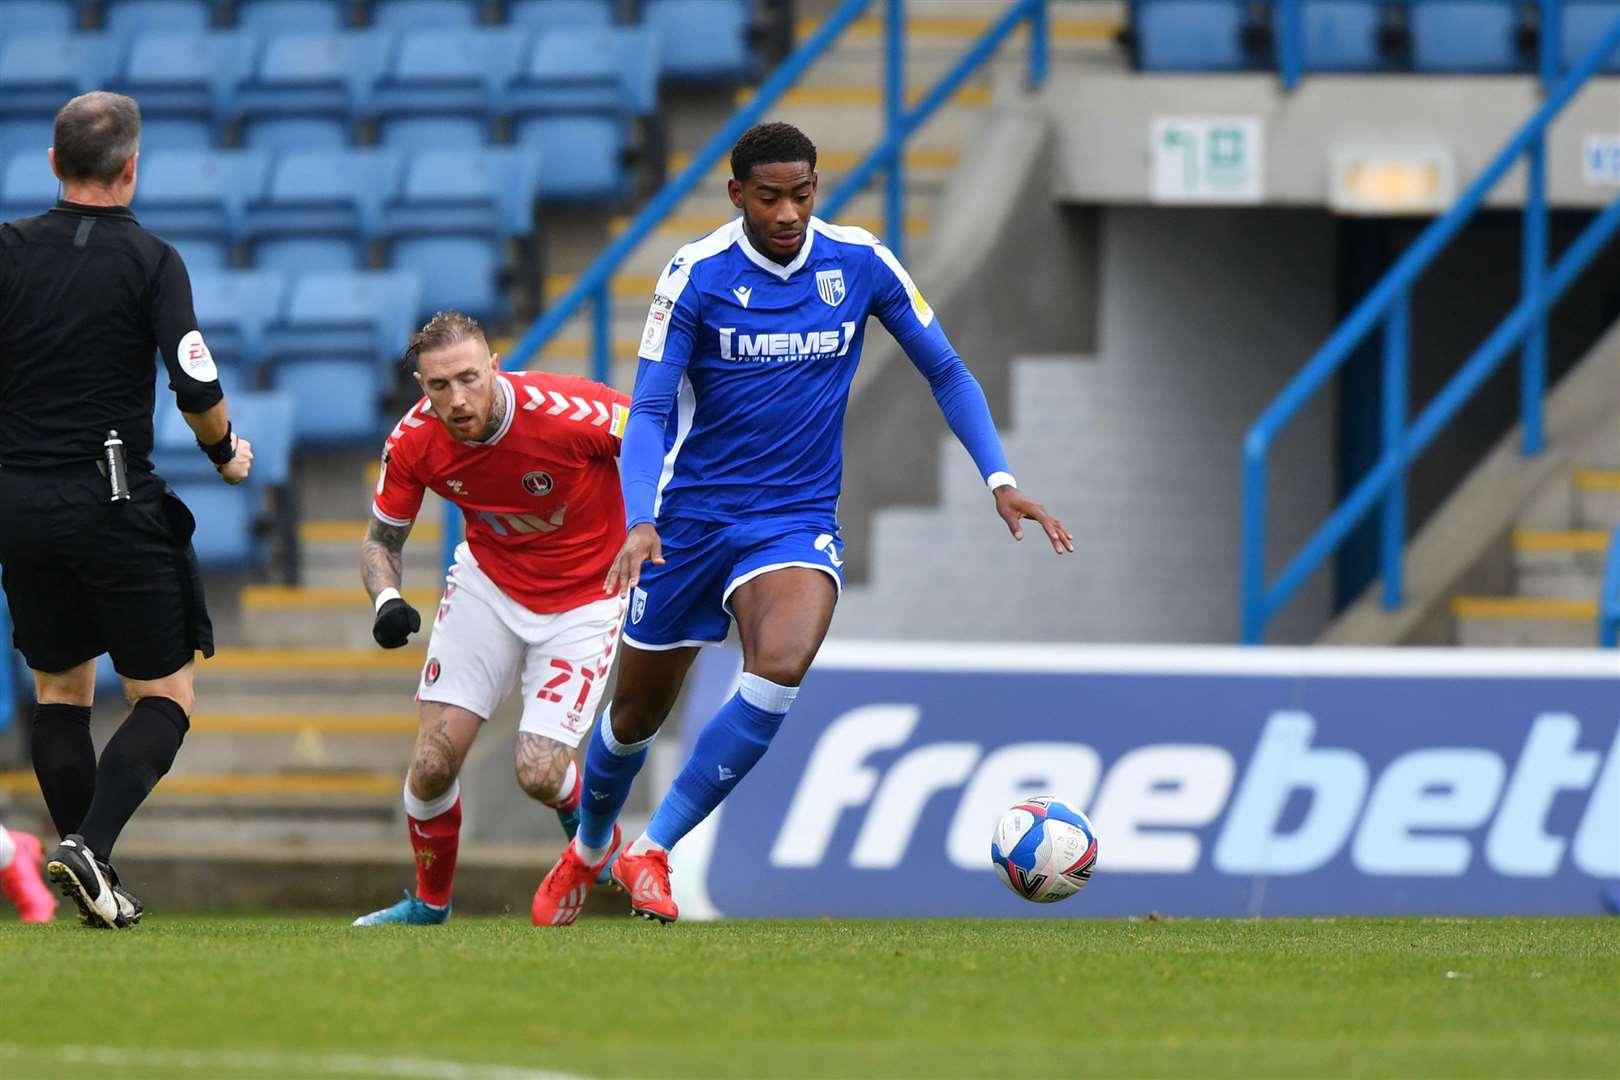 Arsenal's Zech Medley spent the first half of the 2020/21 season with the Gills and will play the remainder in Scotland